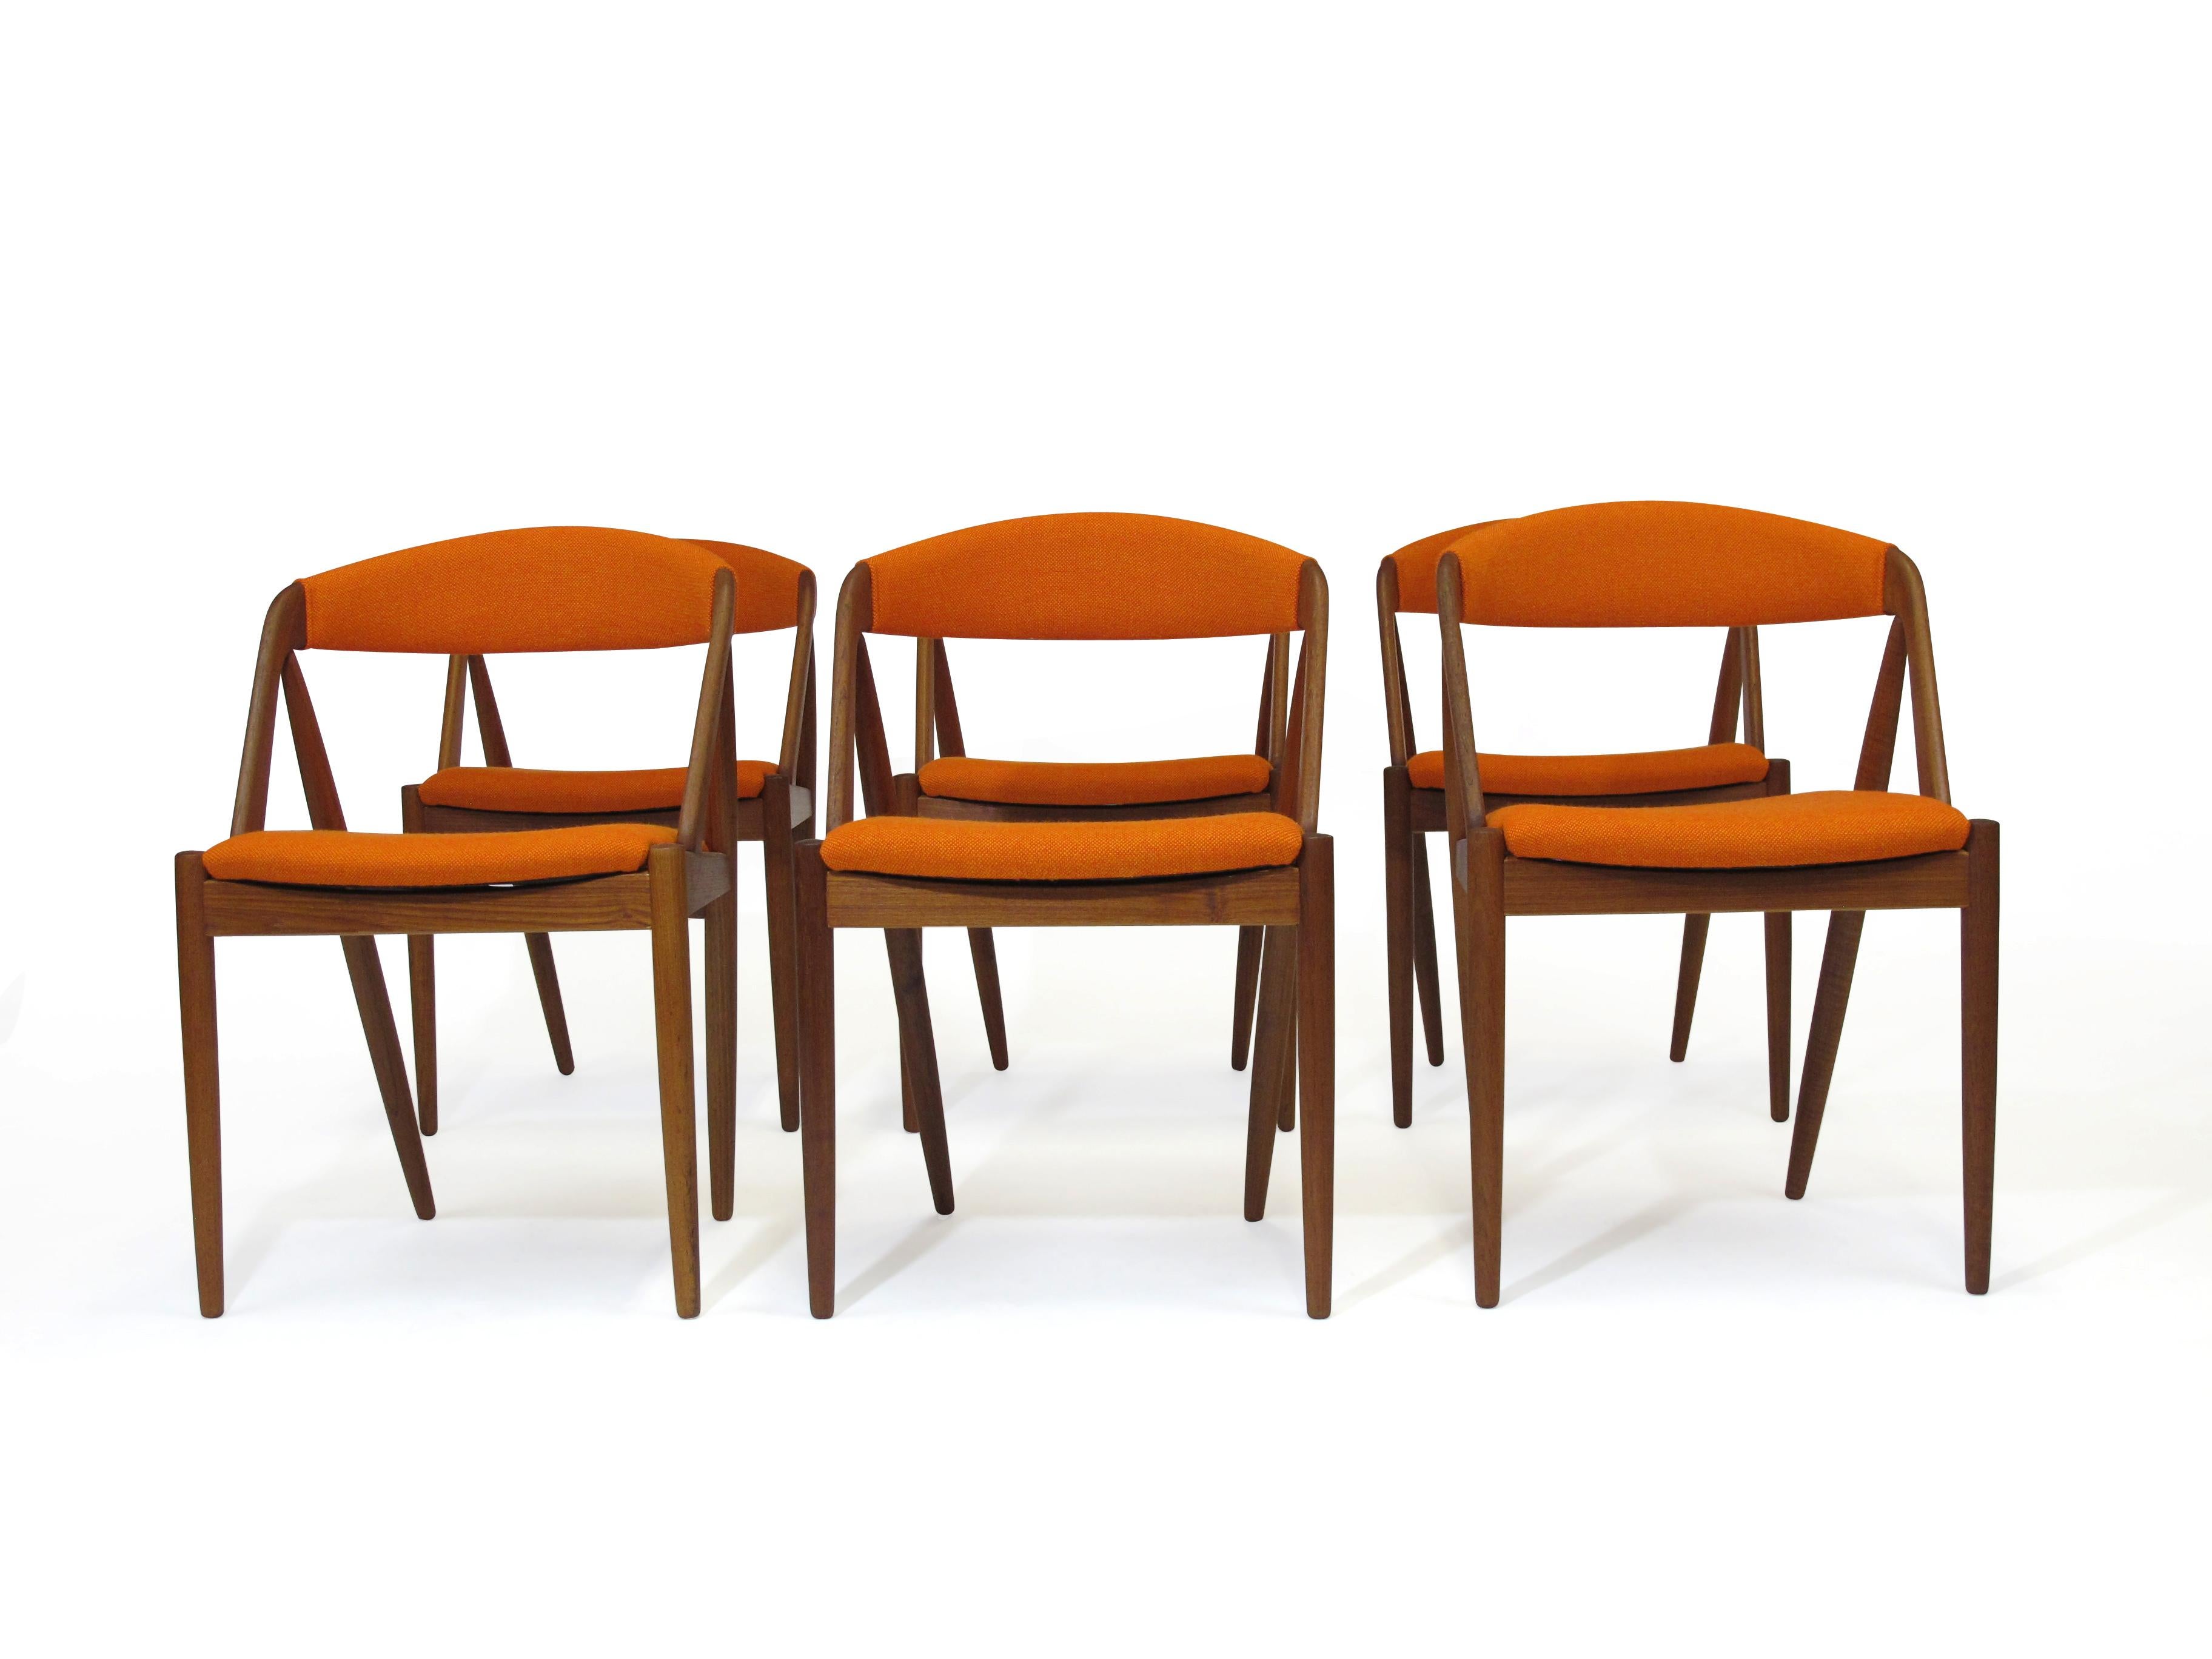 Six Model 31 curved back dining chair designed by Kai Kristiansen. This is a very comfortable chair design with excellent back support. Seat frame constructed of wood frame with rubber strap supports Newly upholstered in orange Hallingdal wool.